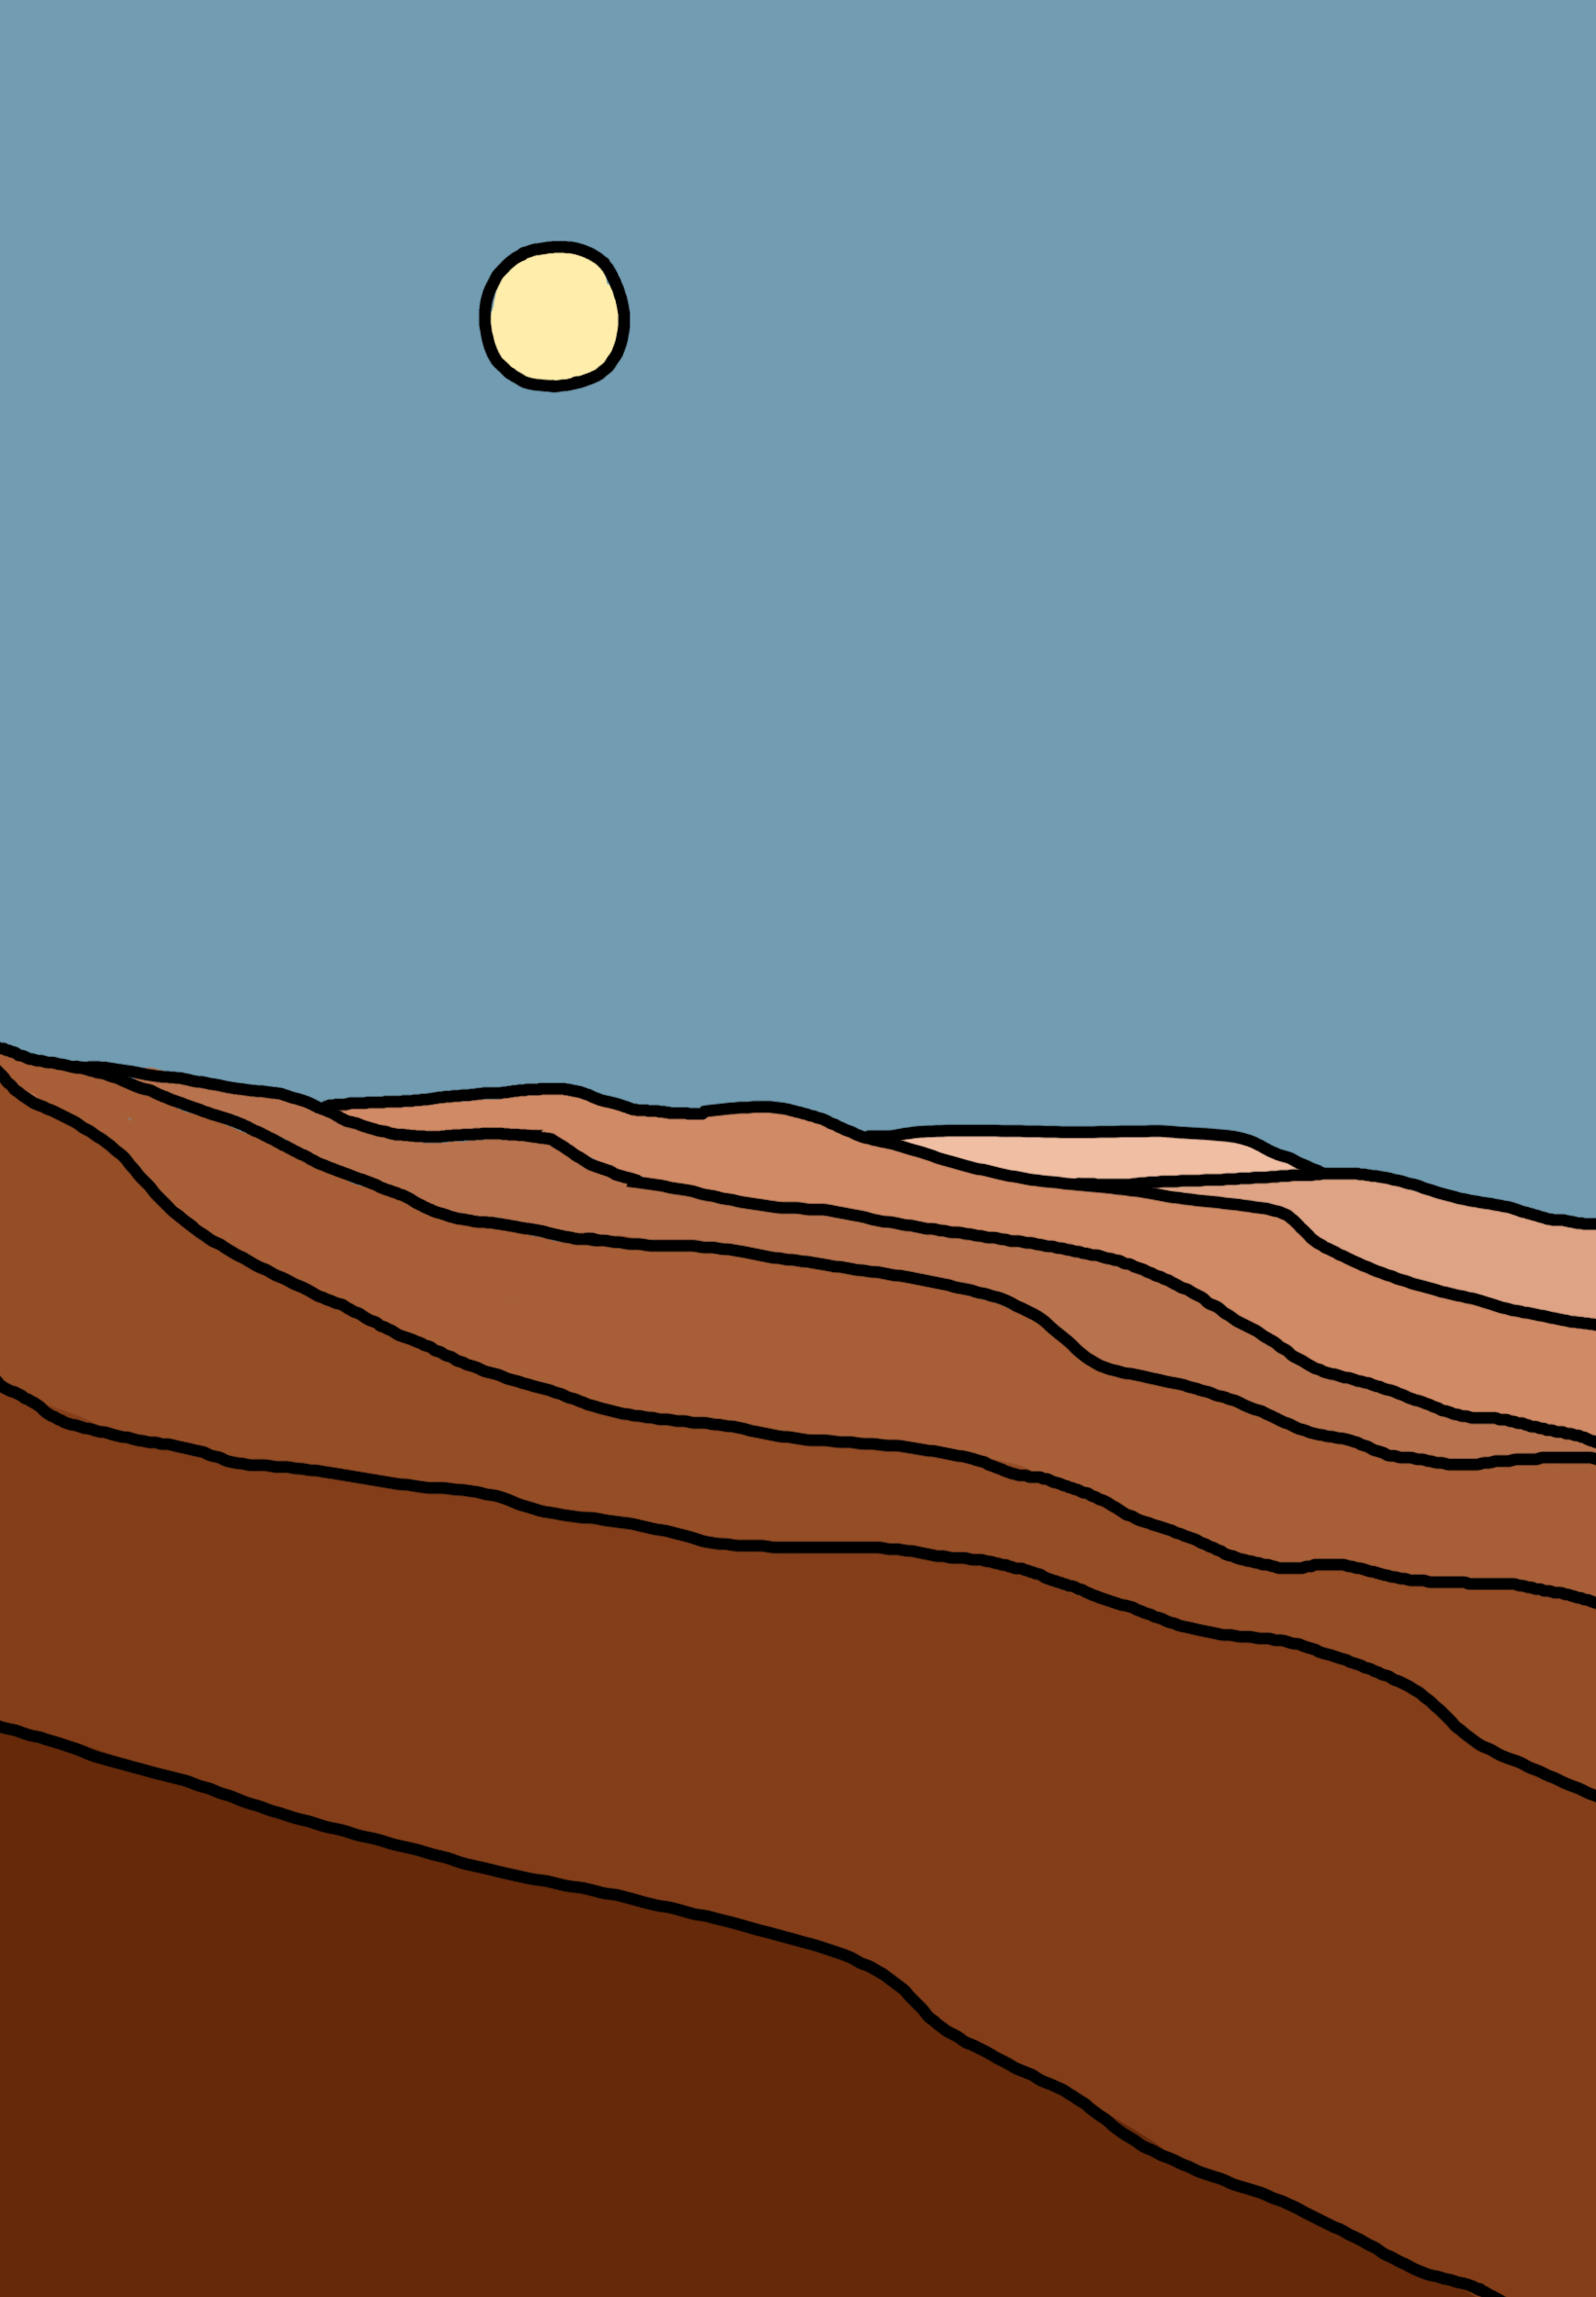 Simple poster used in the game UFO Chaser. A gradient of orange landscape and a turquoise sky, with a small off-center yellow sun.